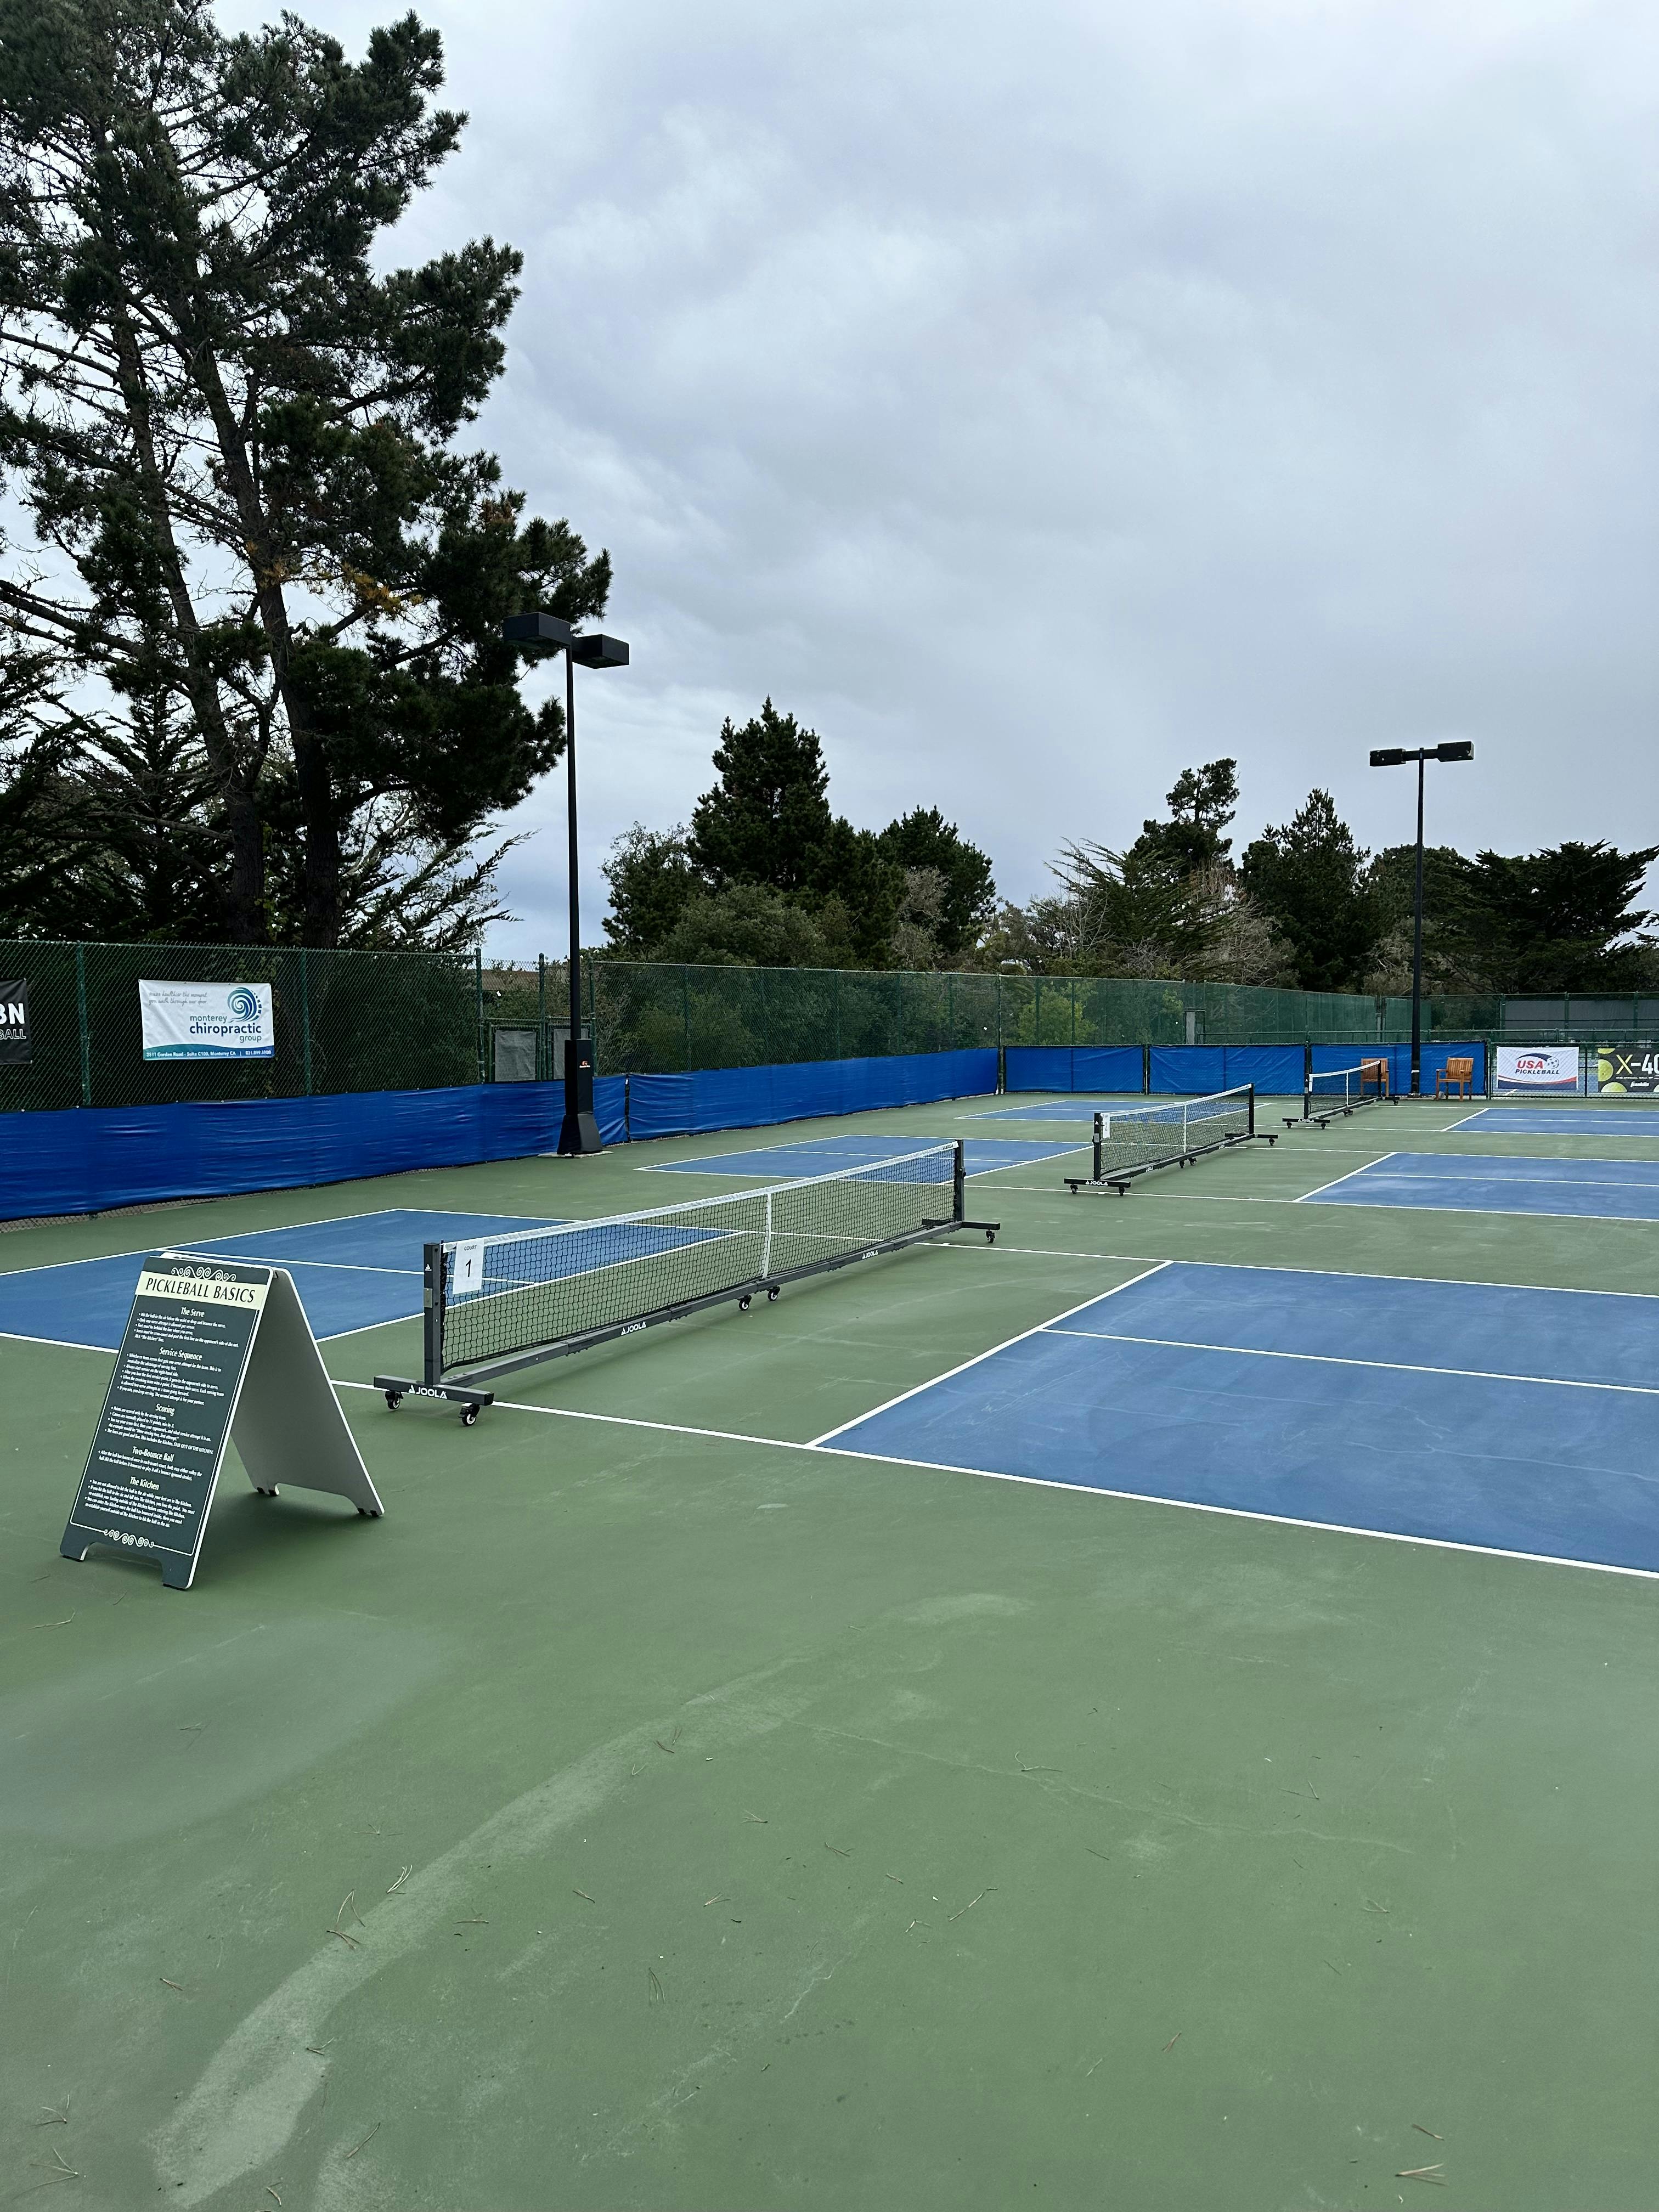 Image 6 of 9 of Monterey Bay Racquet Club court